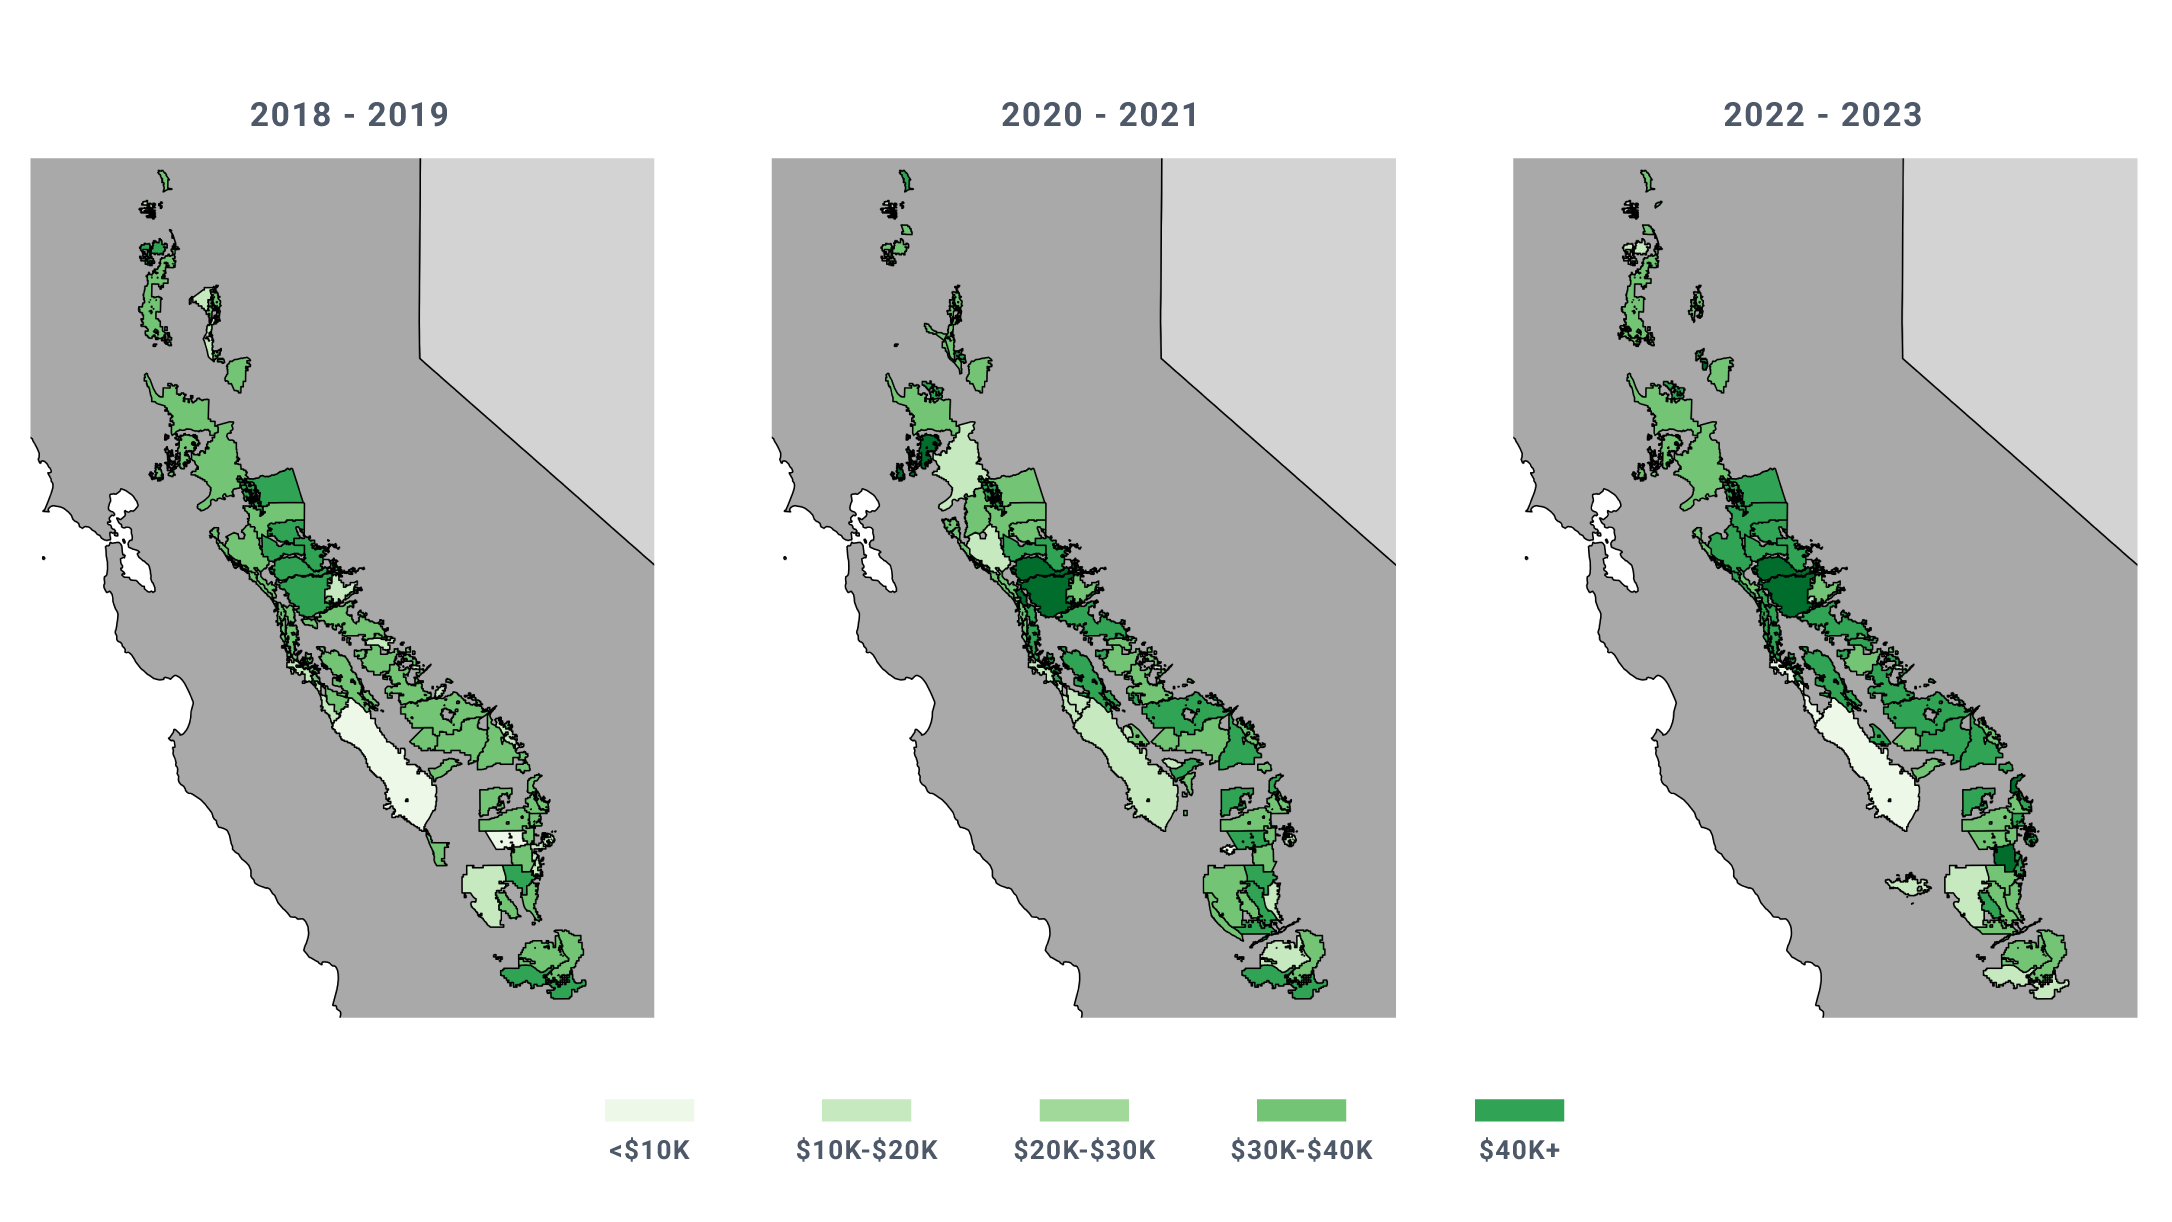 Figure 8. Median Price per Acre for Permanent Crops across Agricultural Water Districts in the Central Valley.